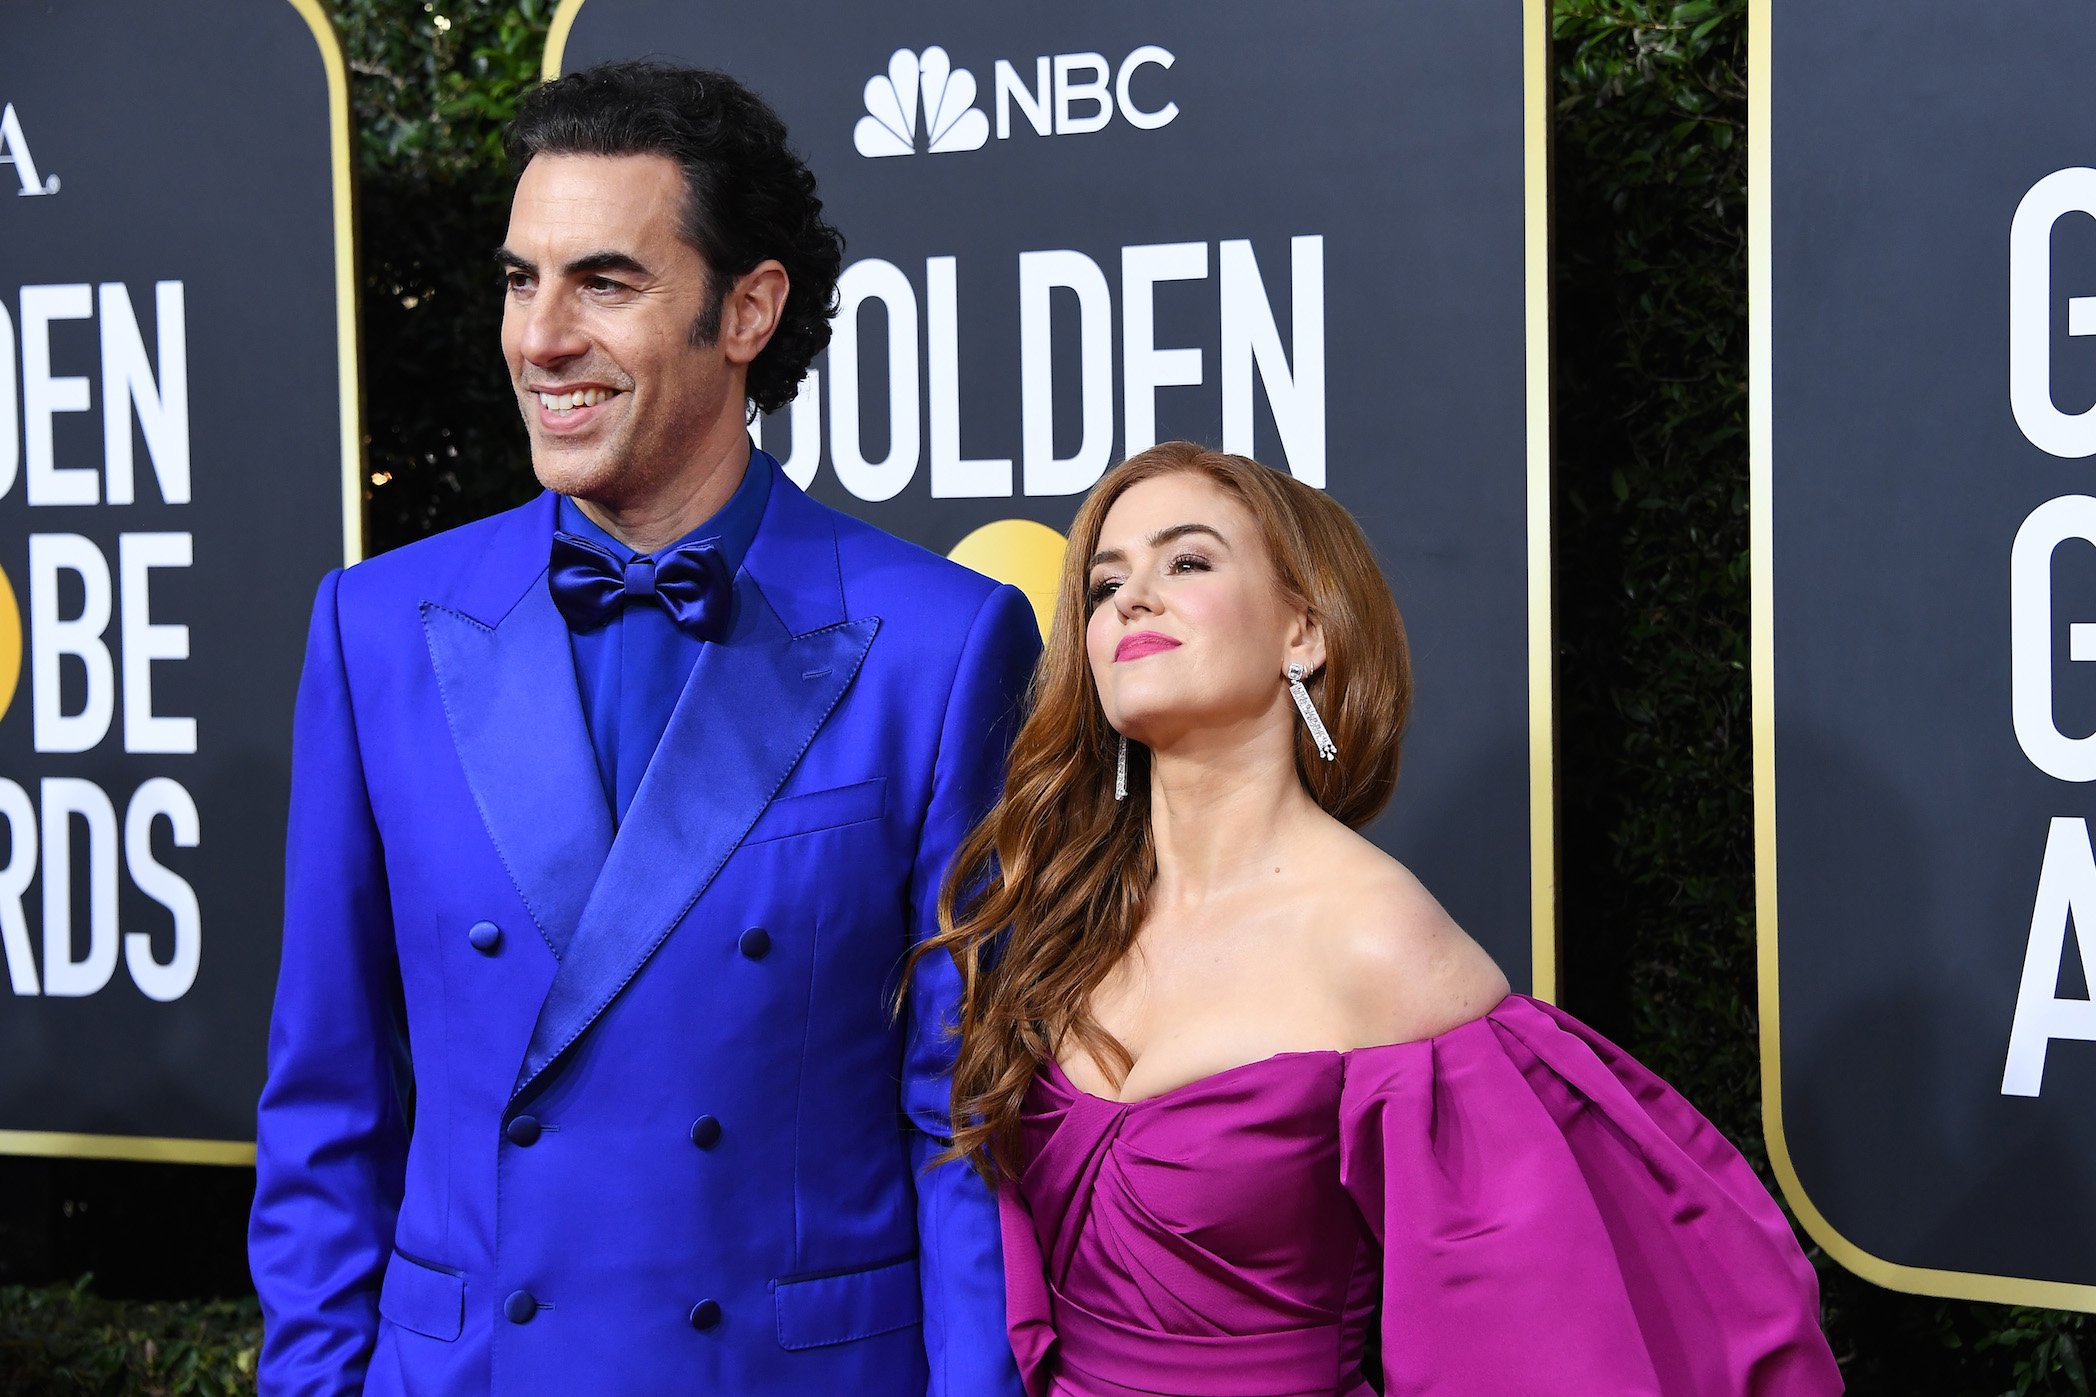 Sacha Baron Cohen standing next to his wife, Isla Fisher, at the Golden Globes